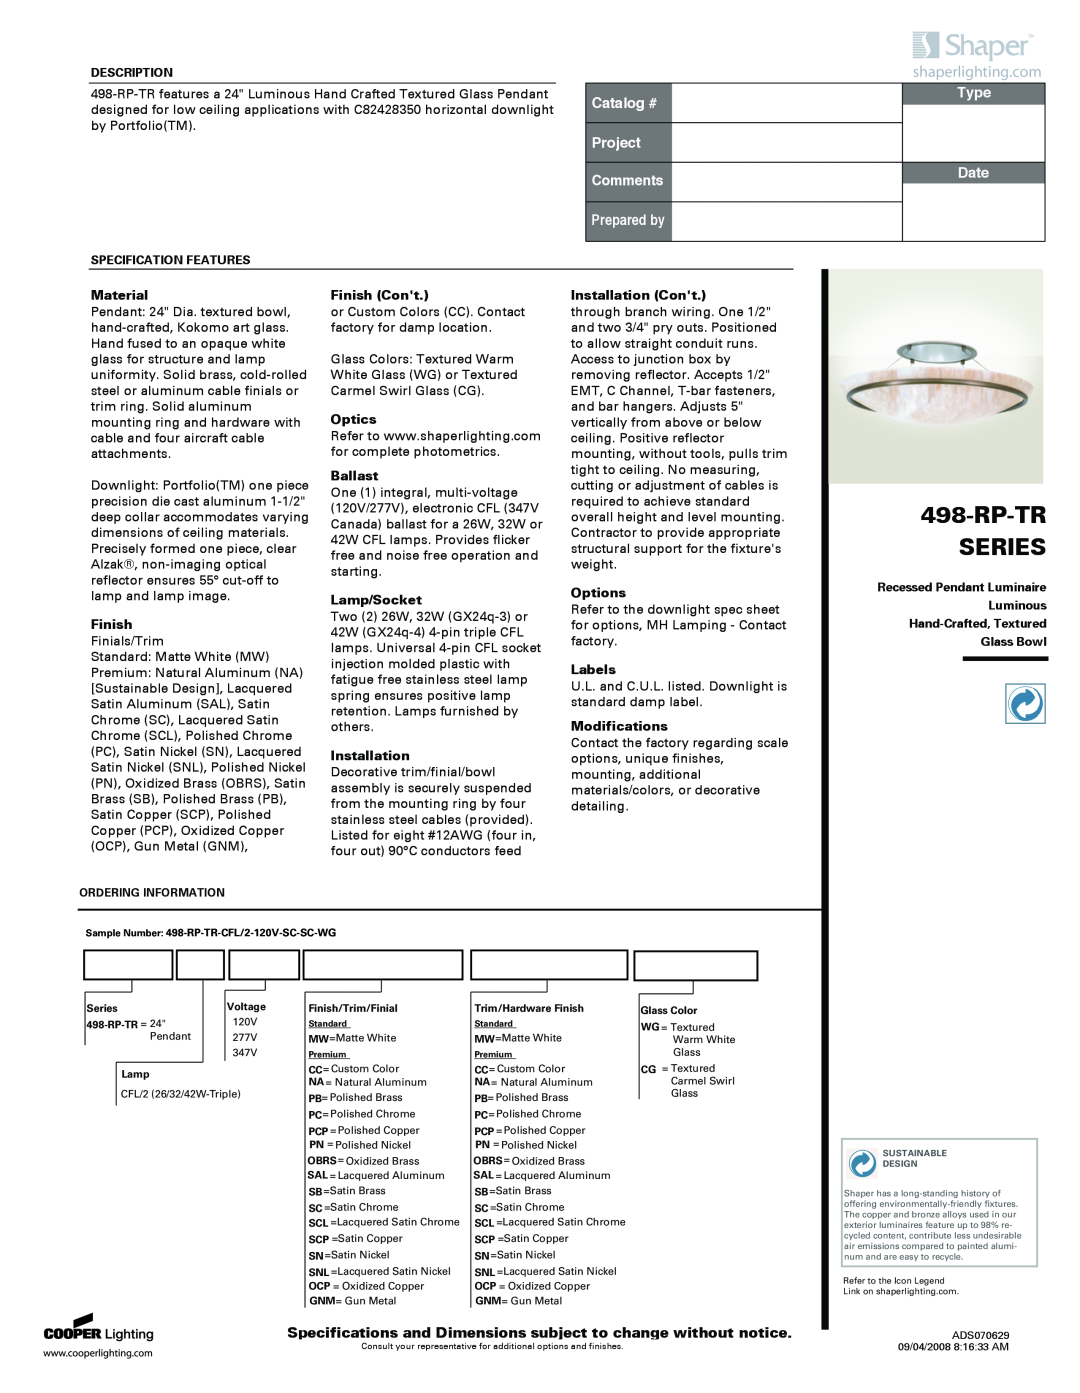 Cooper Lighting 498-RP-TR SERIES specifications Rp-Trseries, Catalog #, Project Comments, Prepared by, Type, Date 